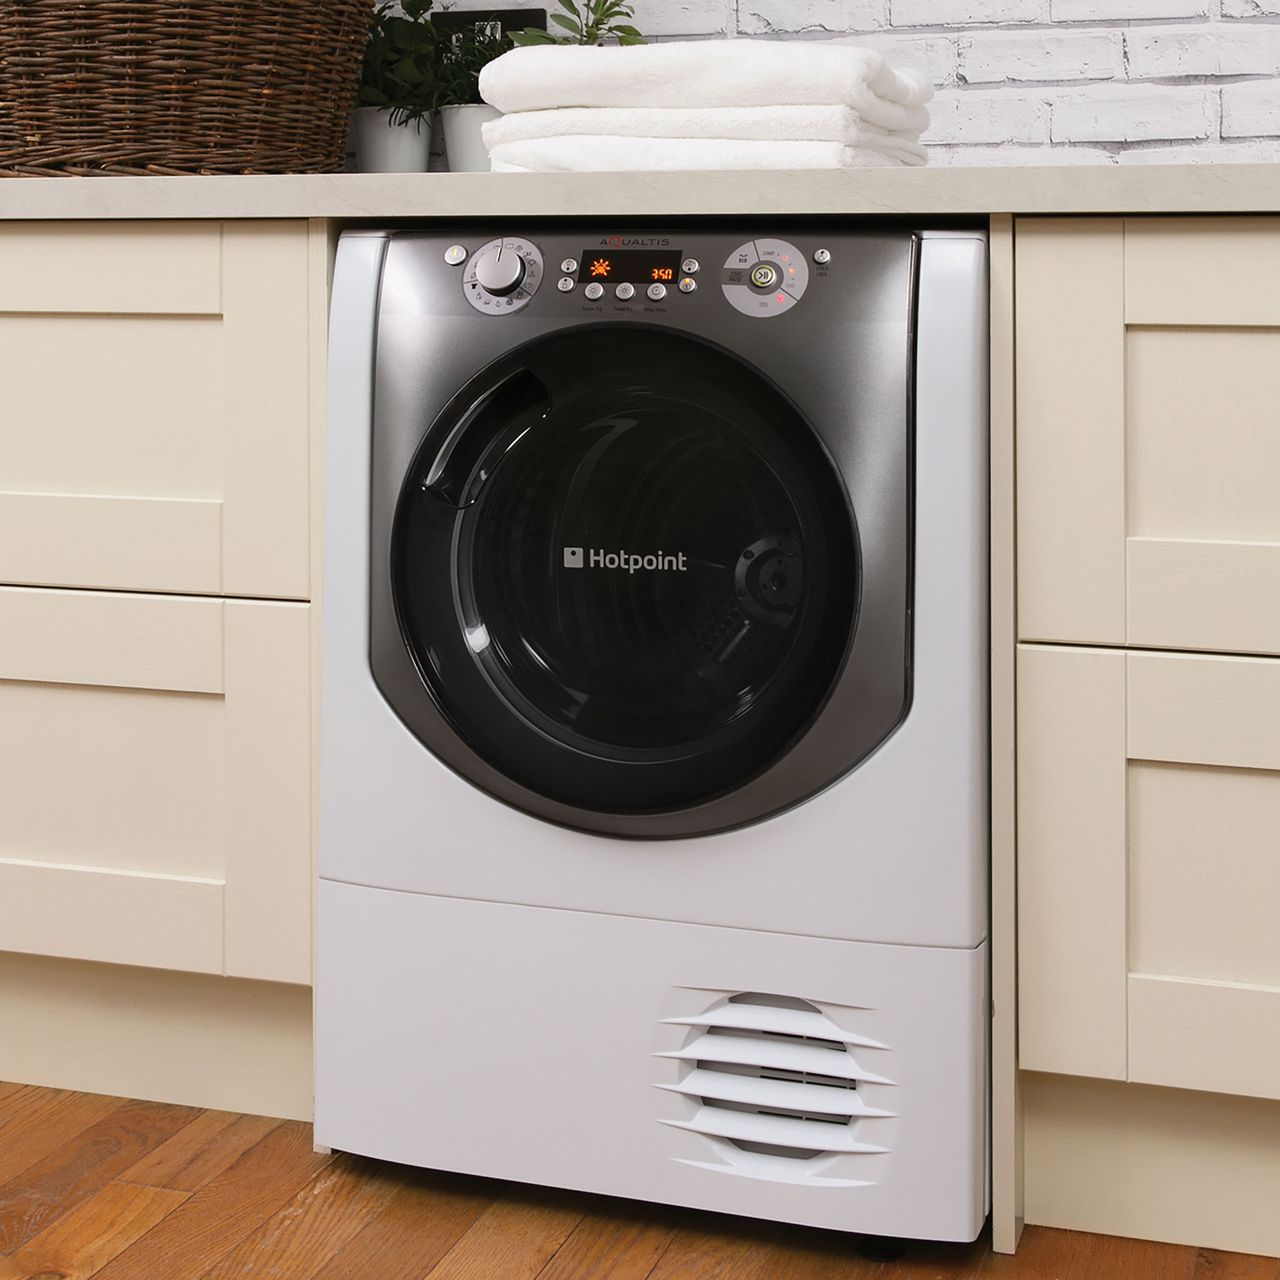 Hotpoint Aqualtis AQC9BF7E1 9Kg Condenser Tumble Dryer Review